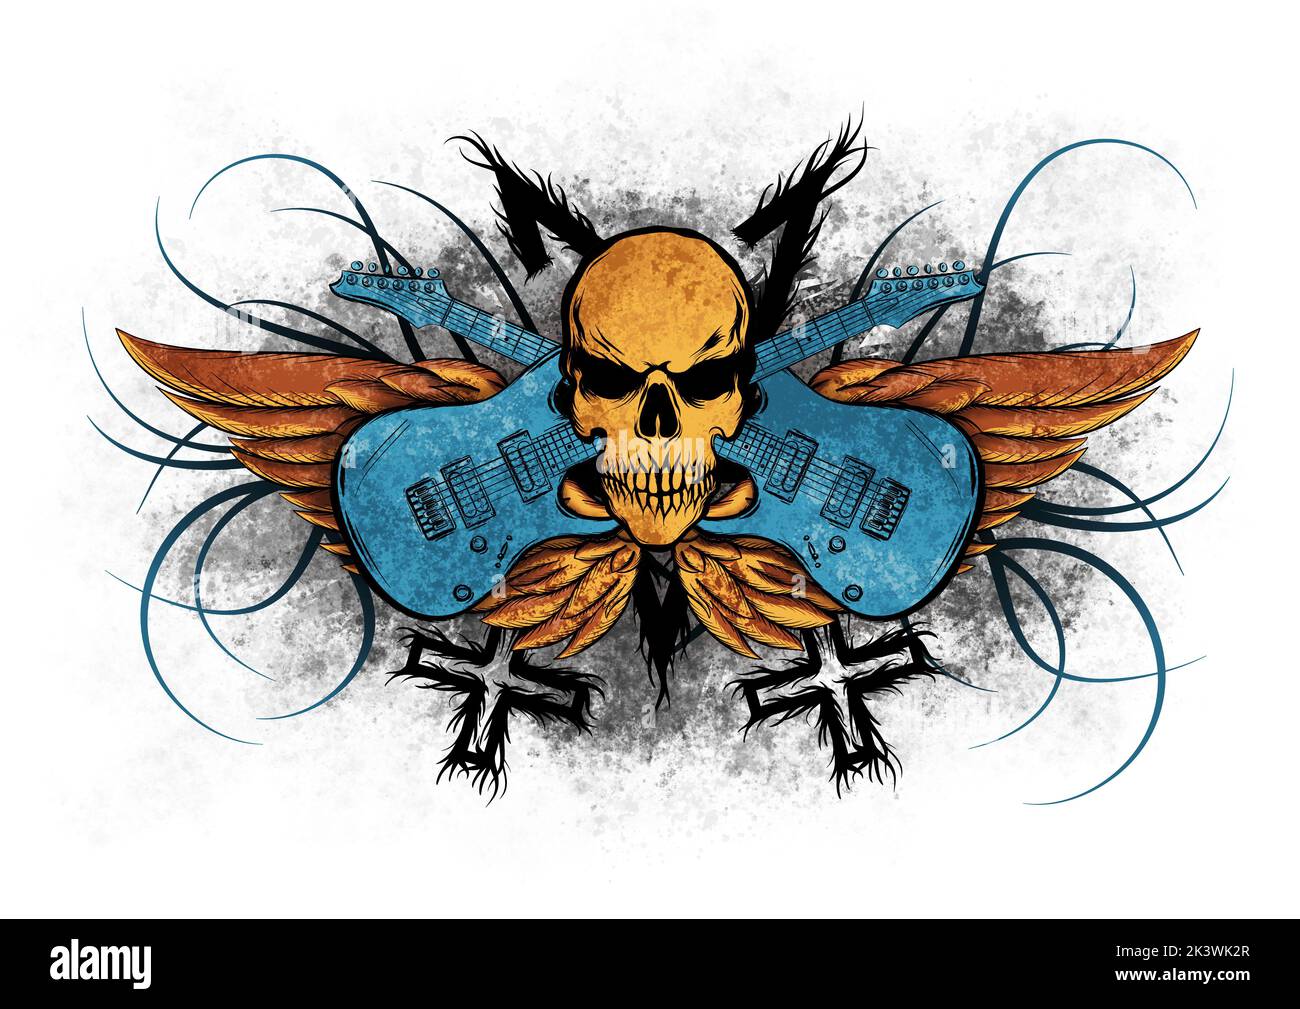 Rock metal skull with electric guitars and wings. Hard music art symbol. Stock Photo